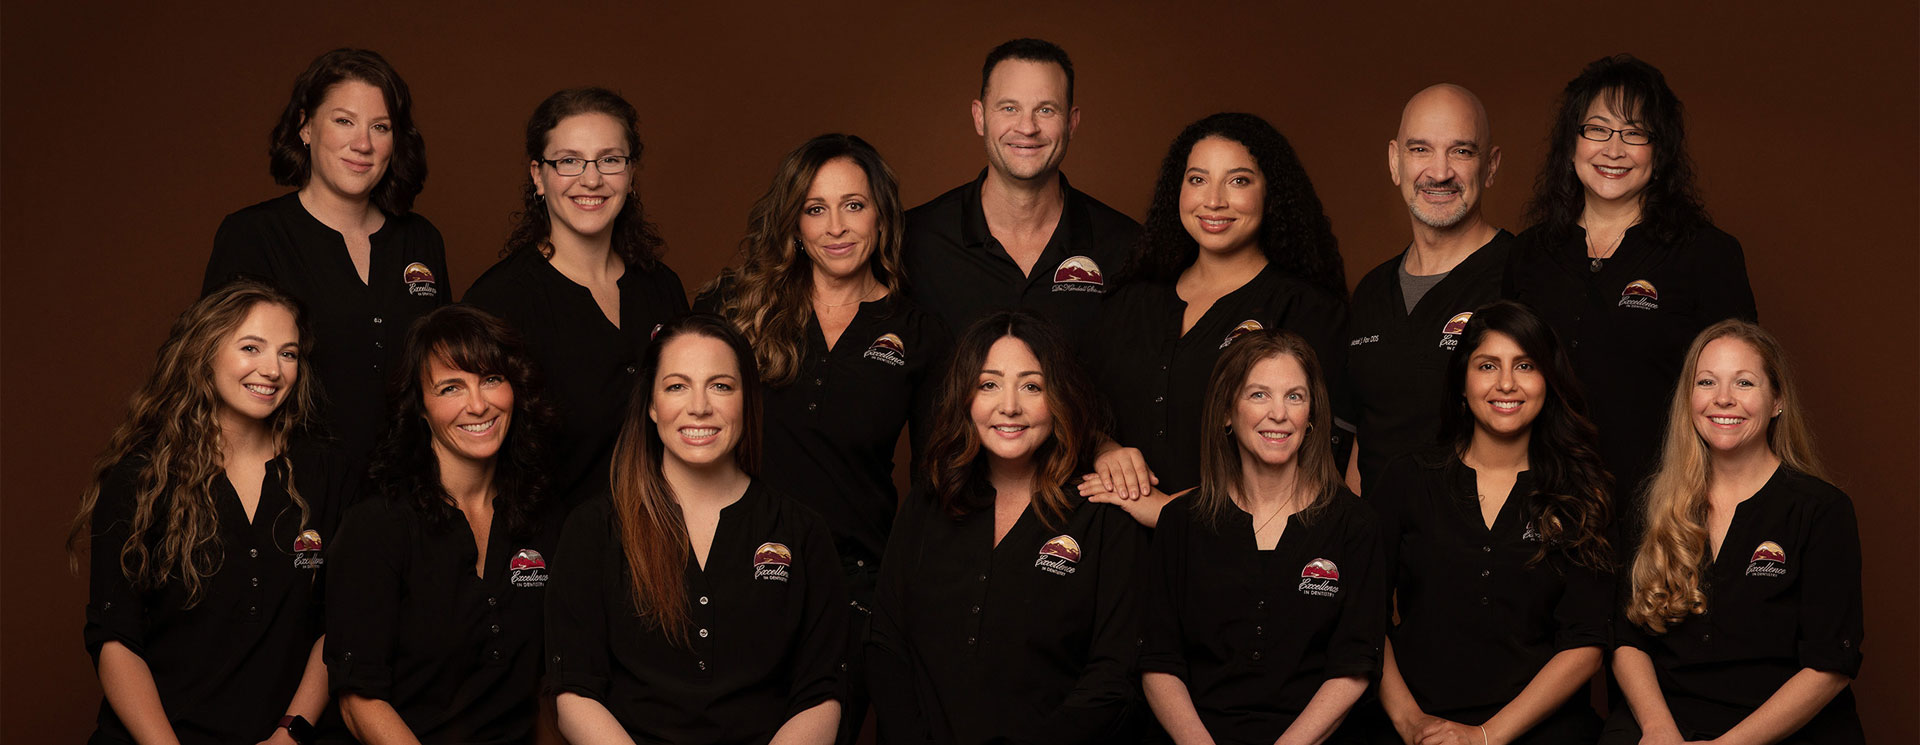 The team of Excellence in Dentistry